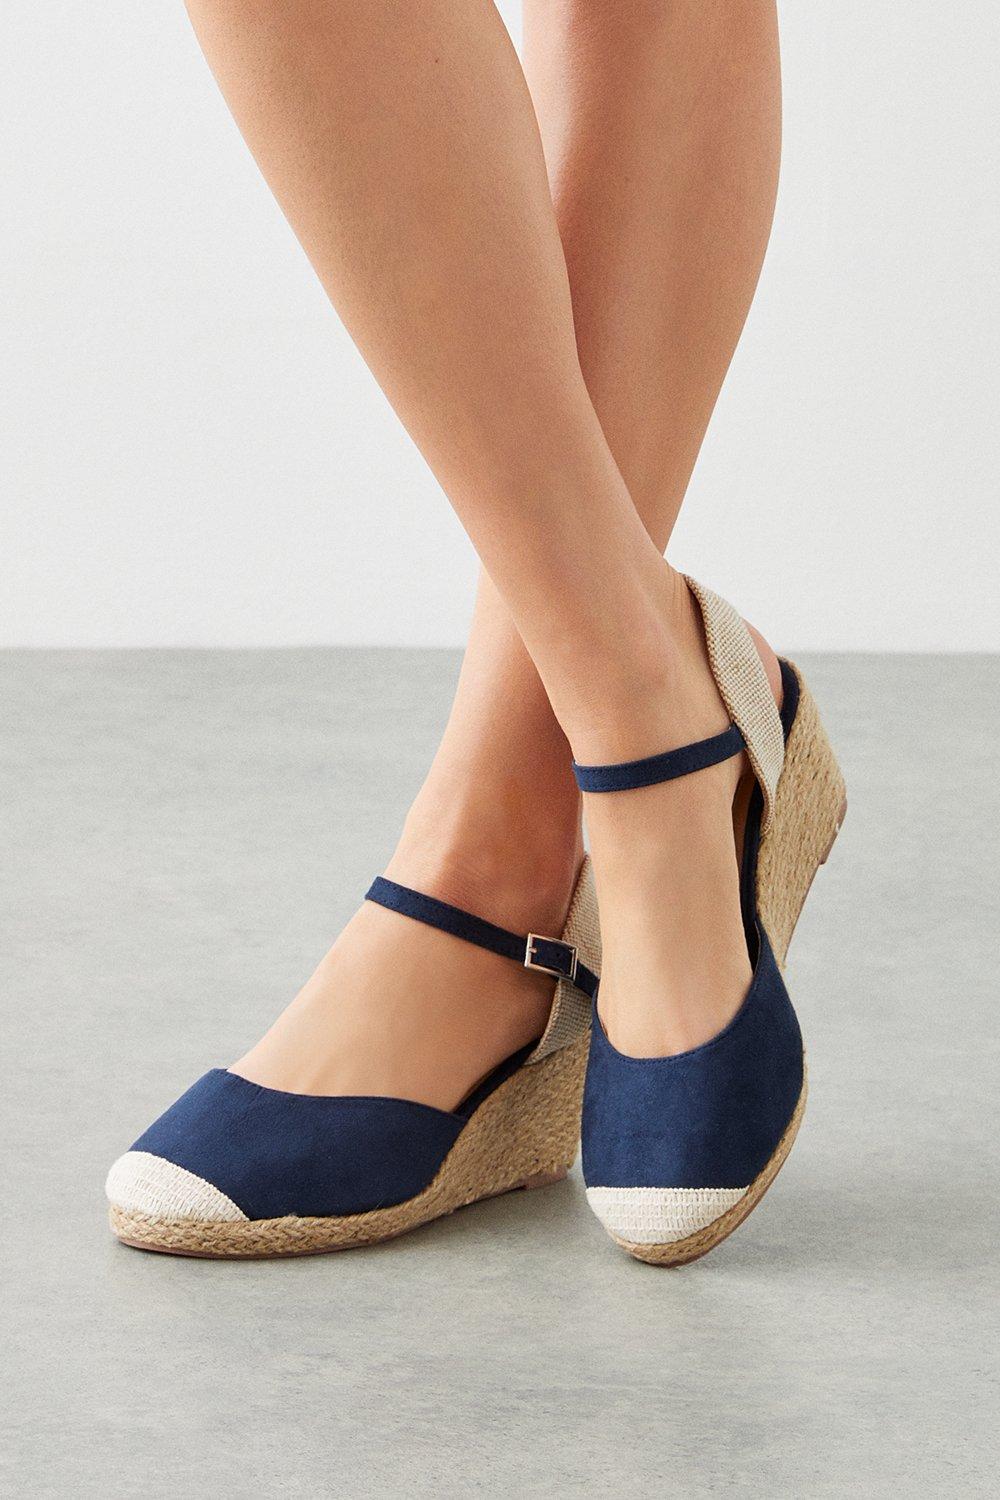 Women’s Extra Wide Fit Rolo Closed Toe Canvas Wedges - navy - 5